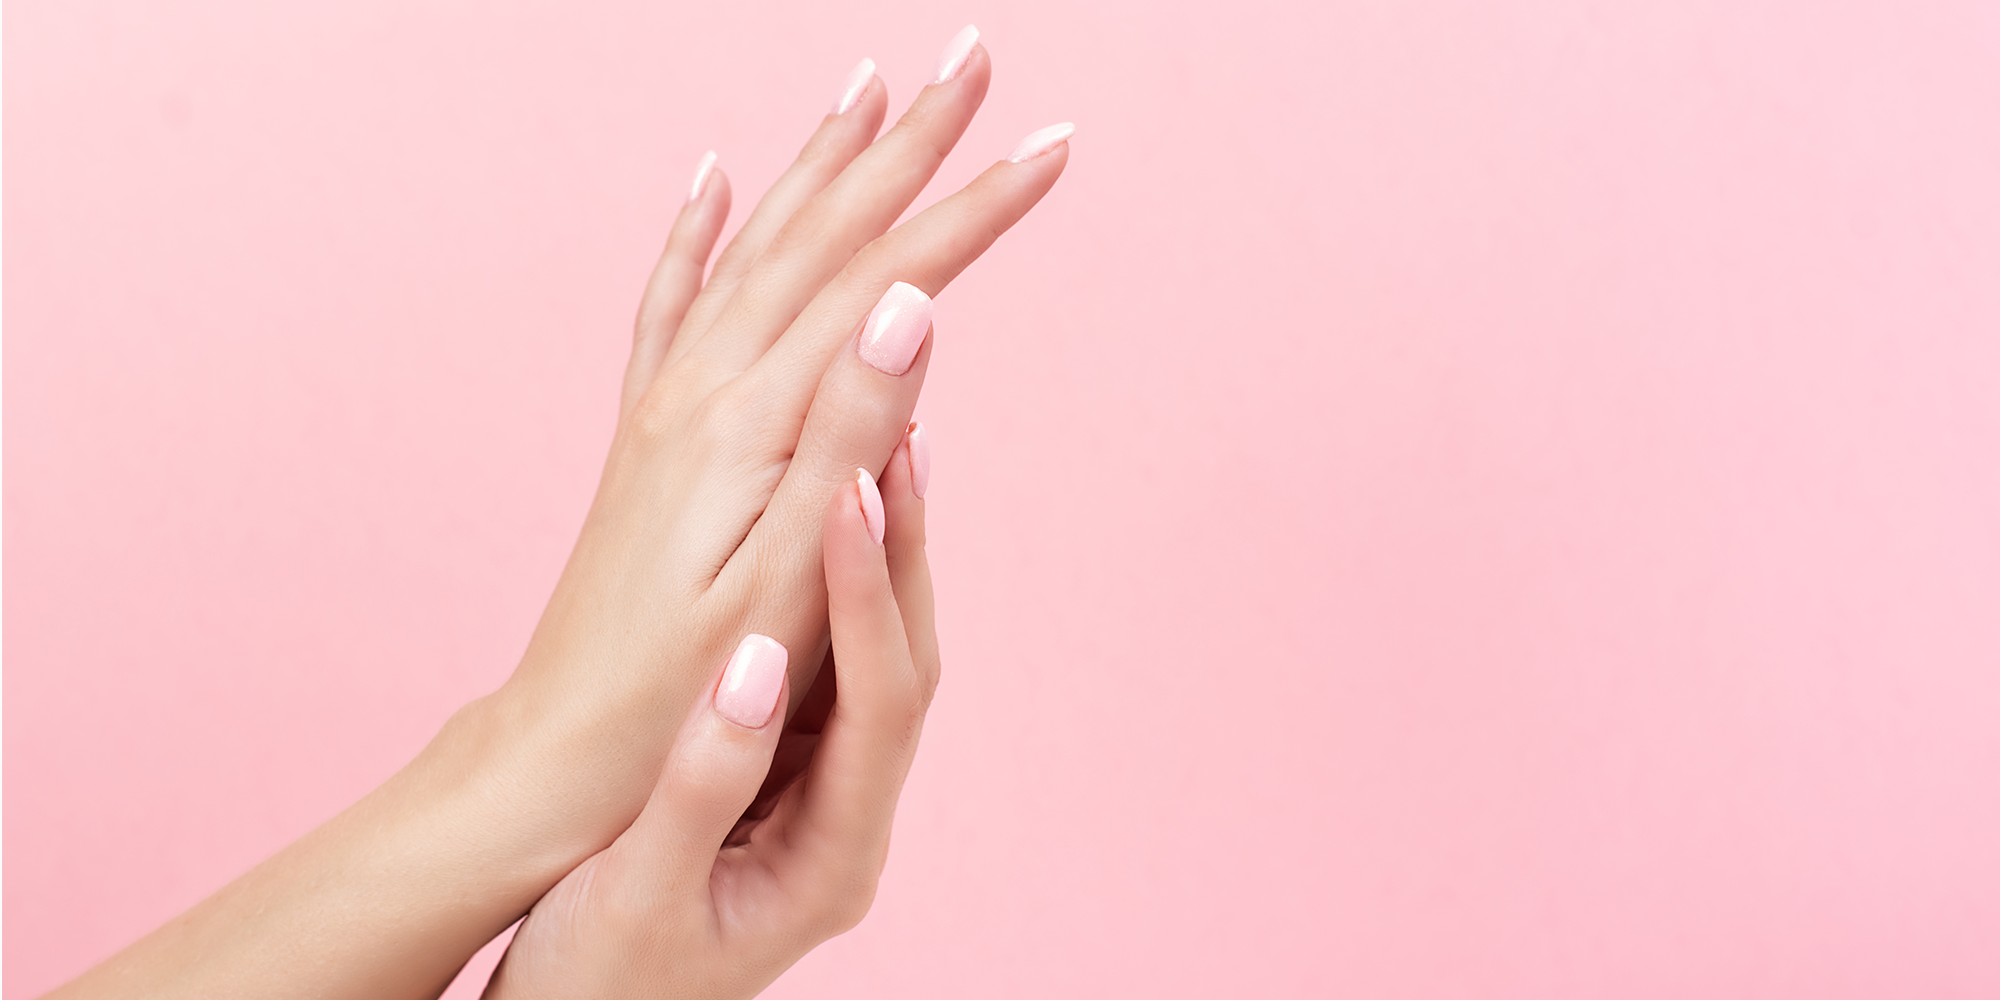 9 Types Of Manicures To Know - A Guide To The Different Styles Of Manis